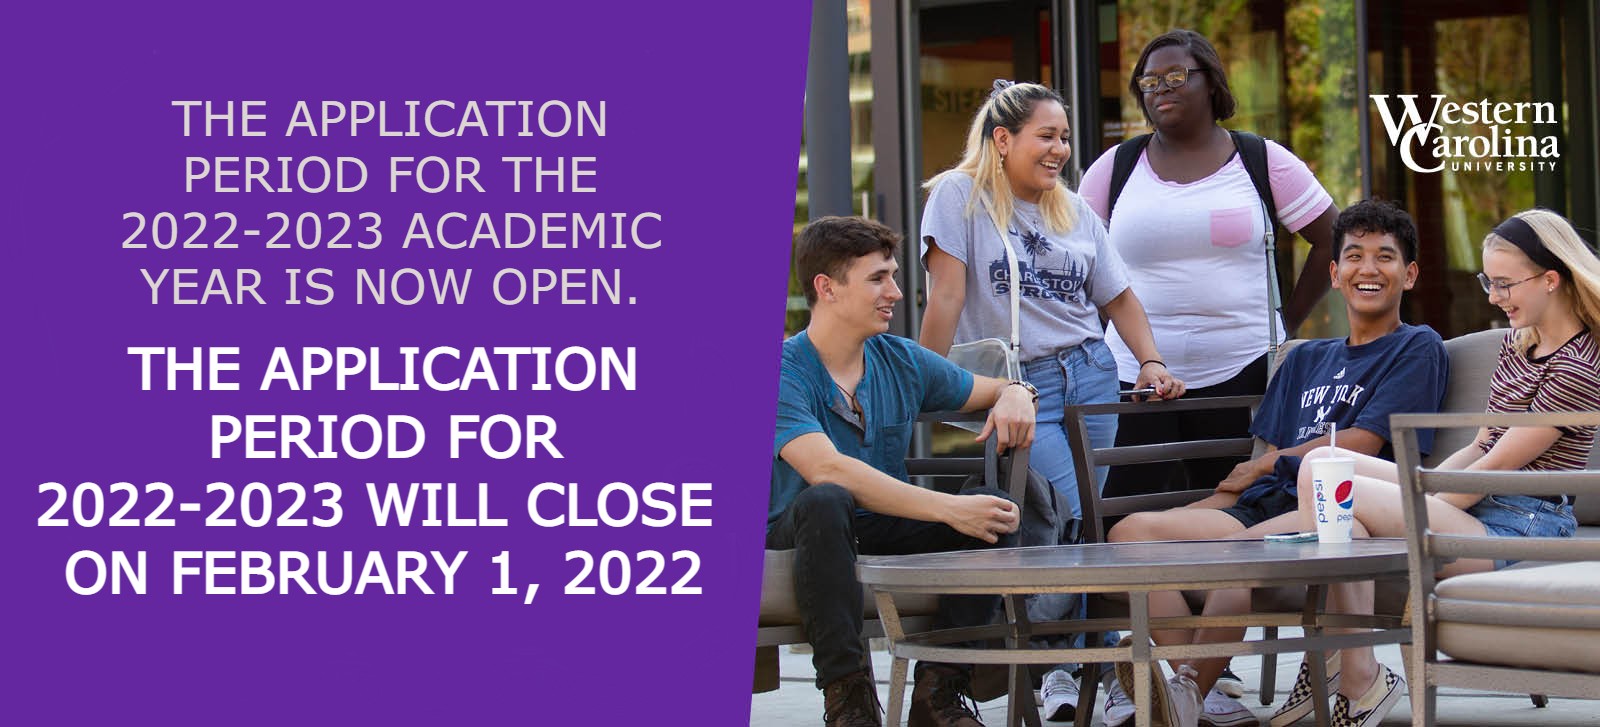 The application period for the 2022-2023 academic year is now open.